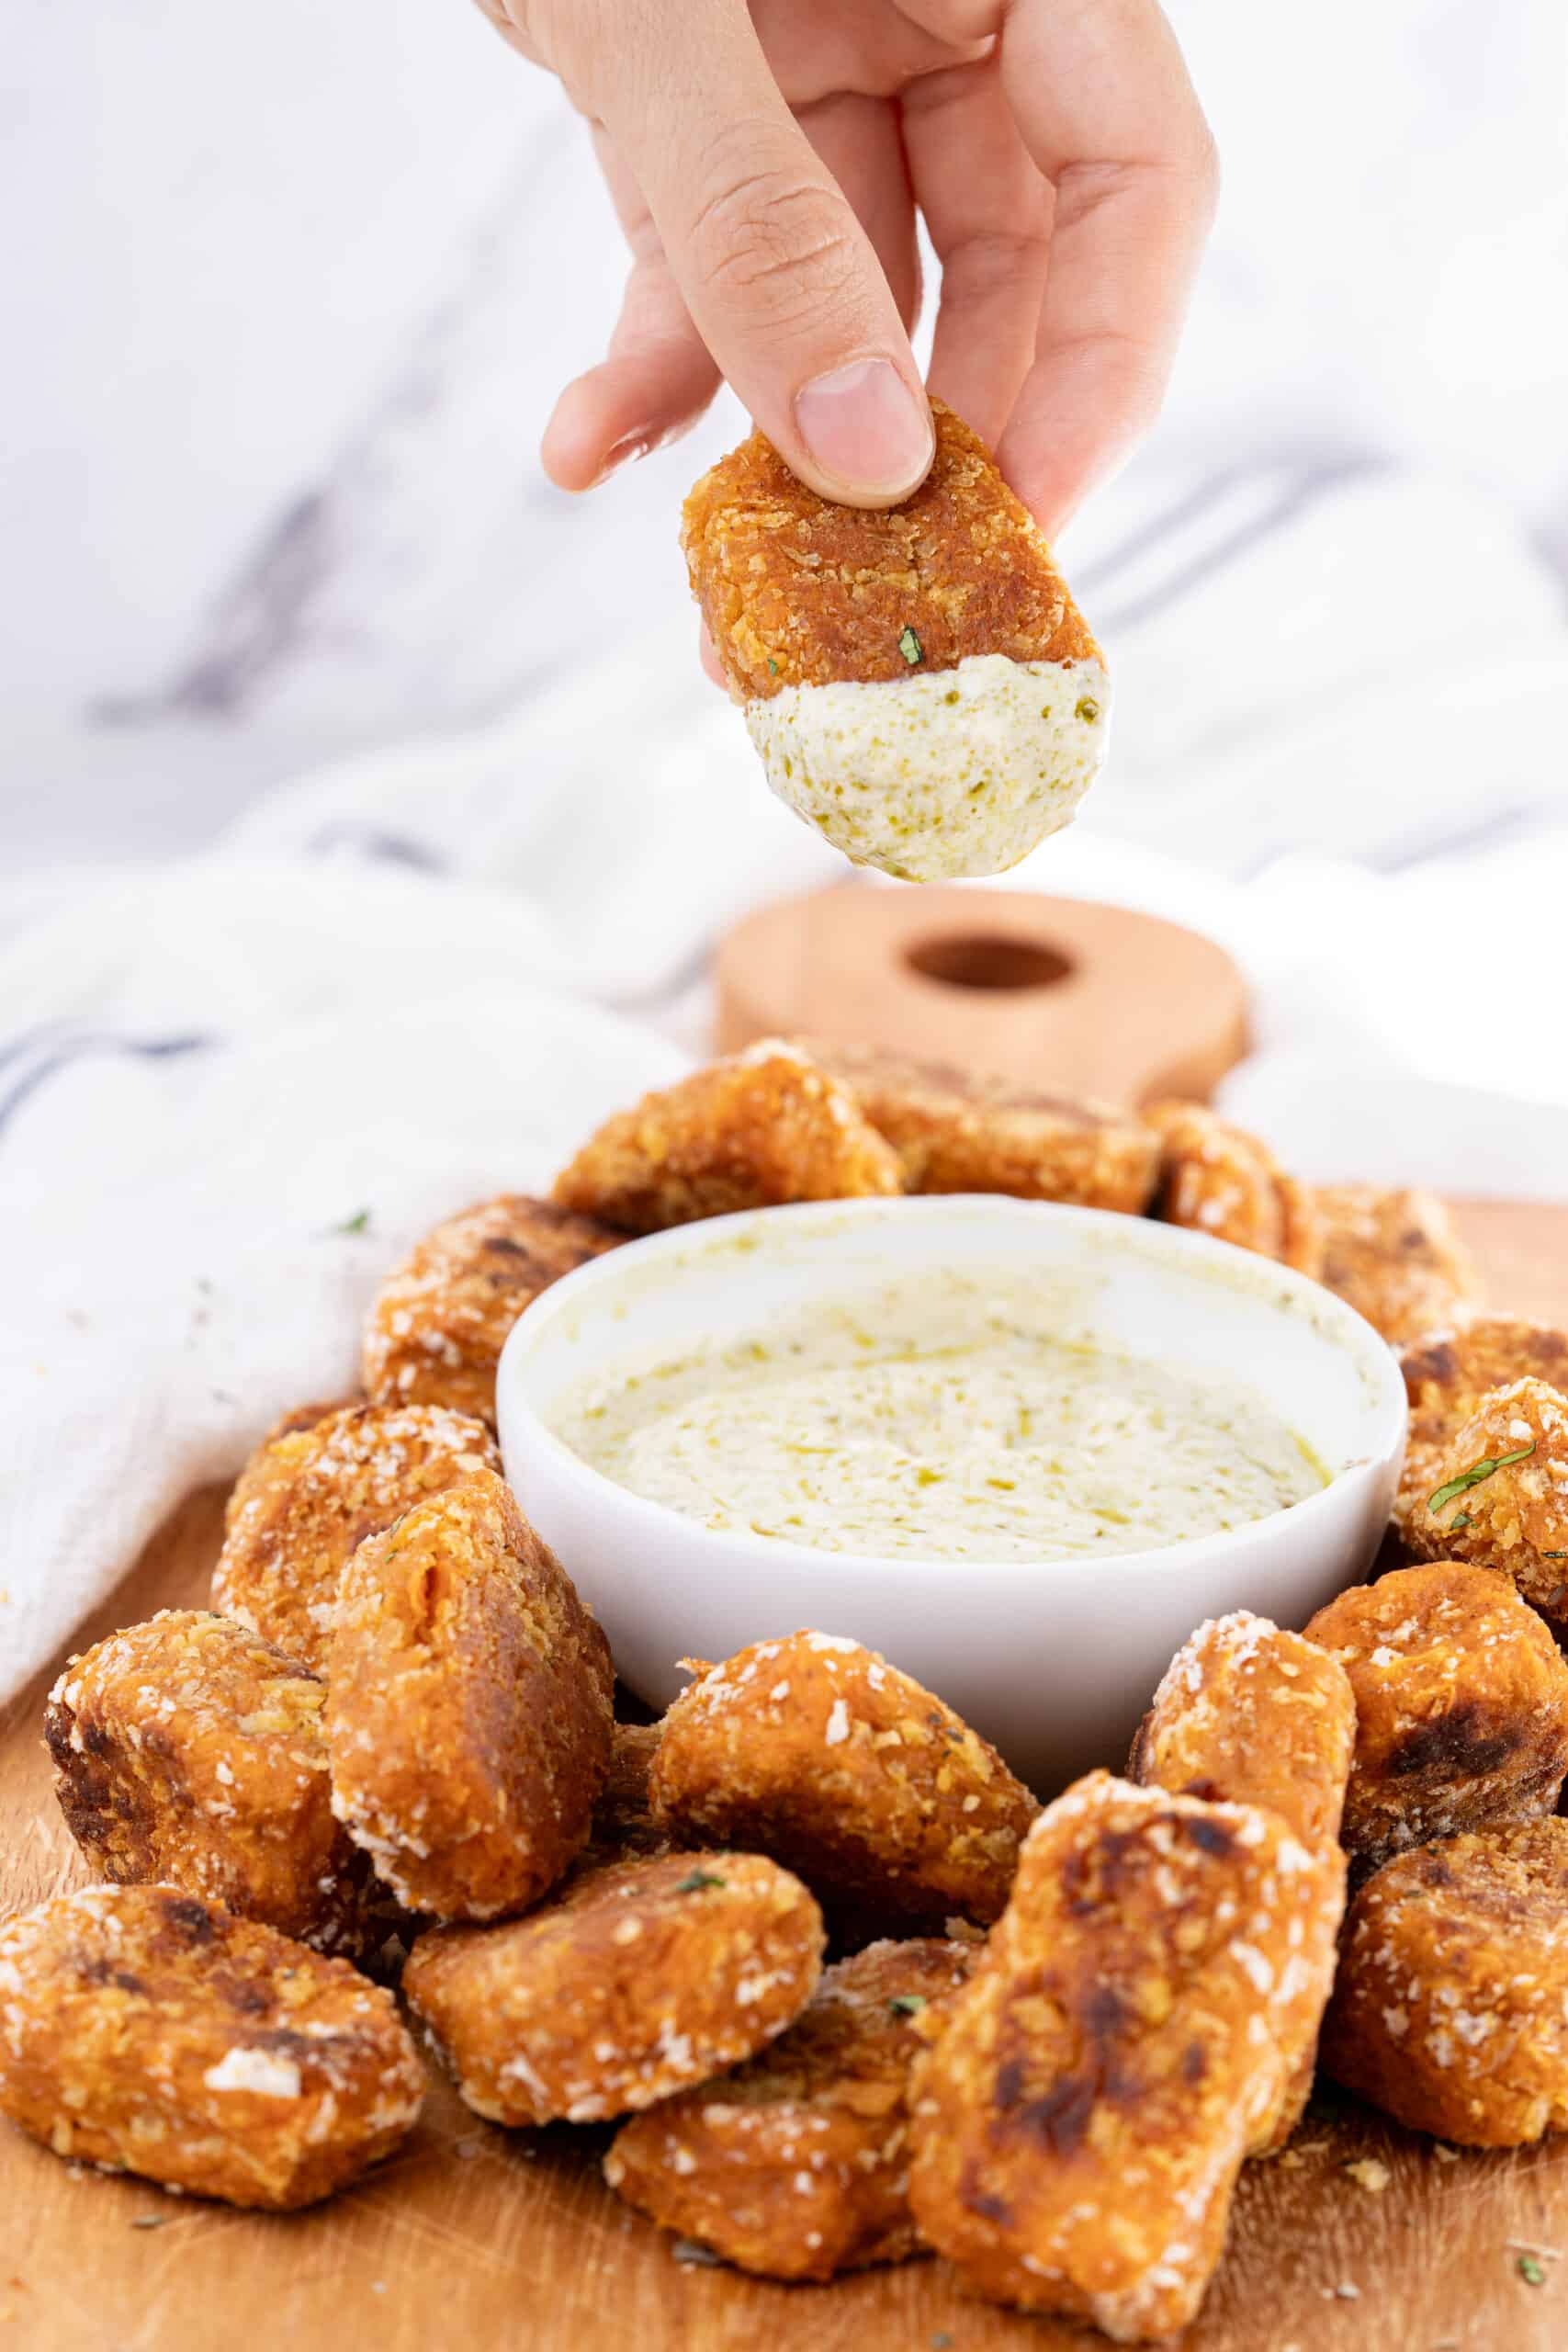 Dipping Sweet Tater Tots